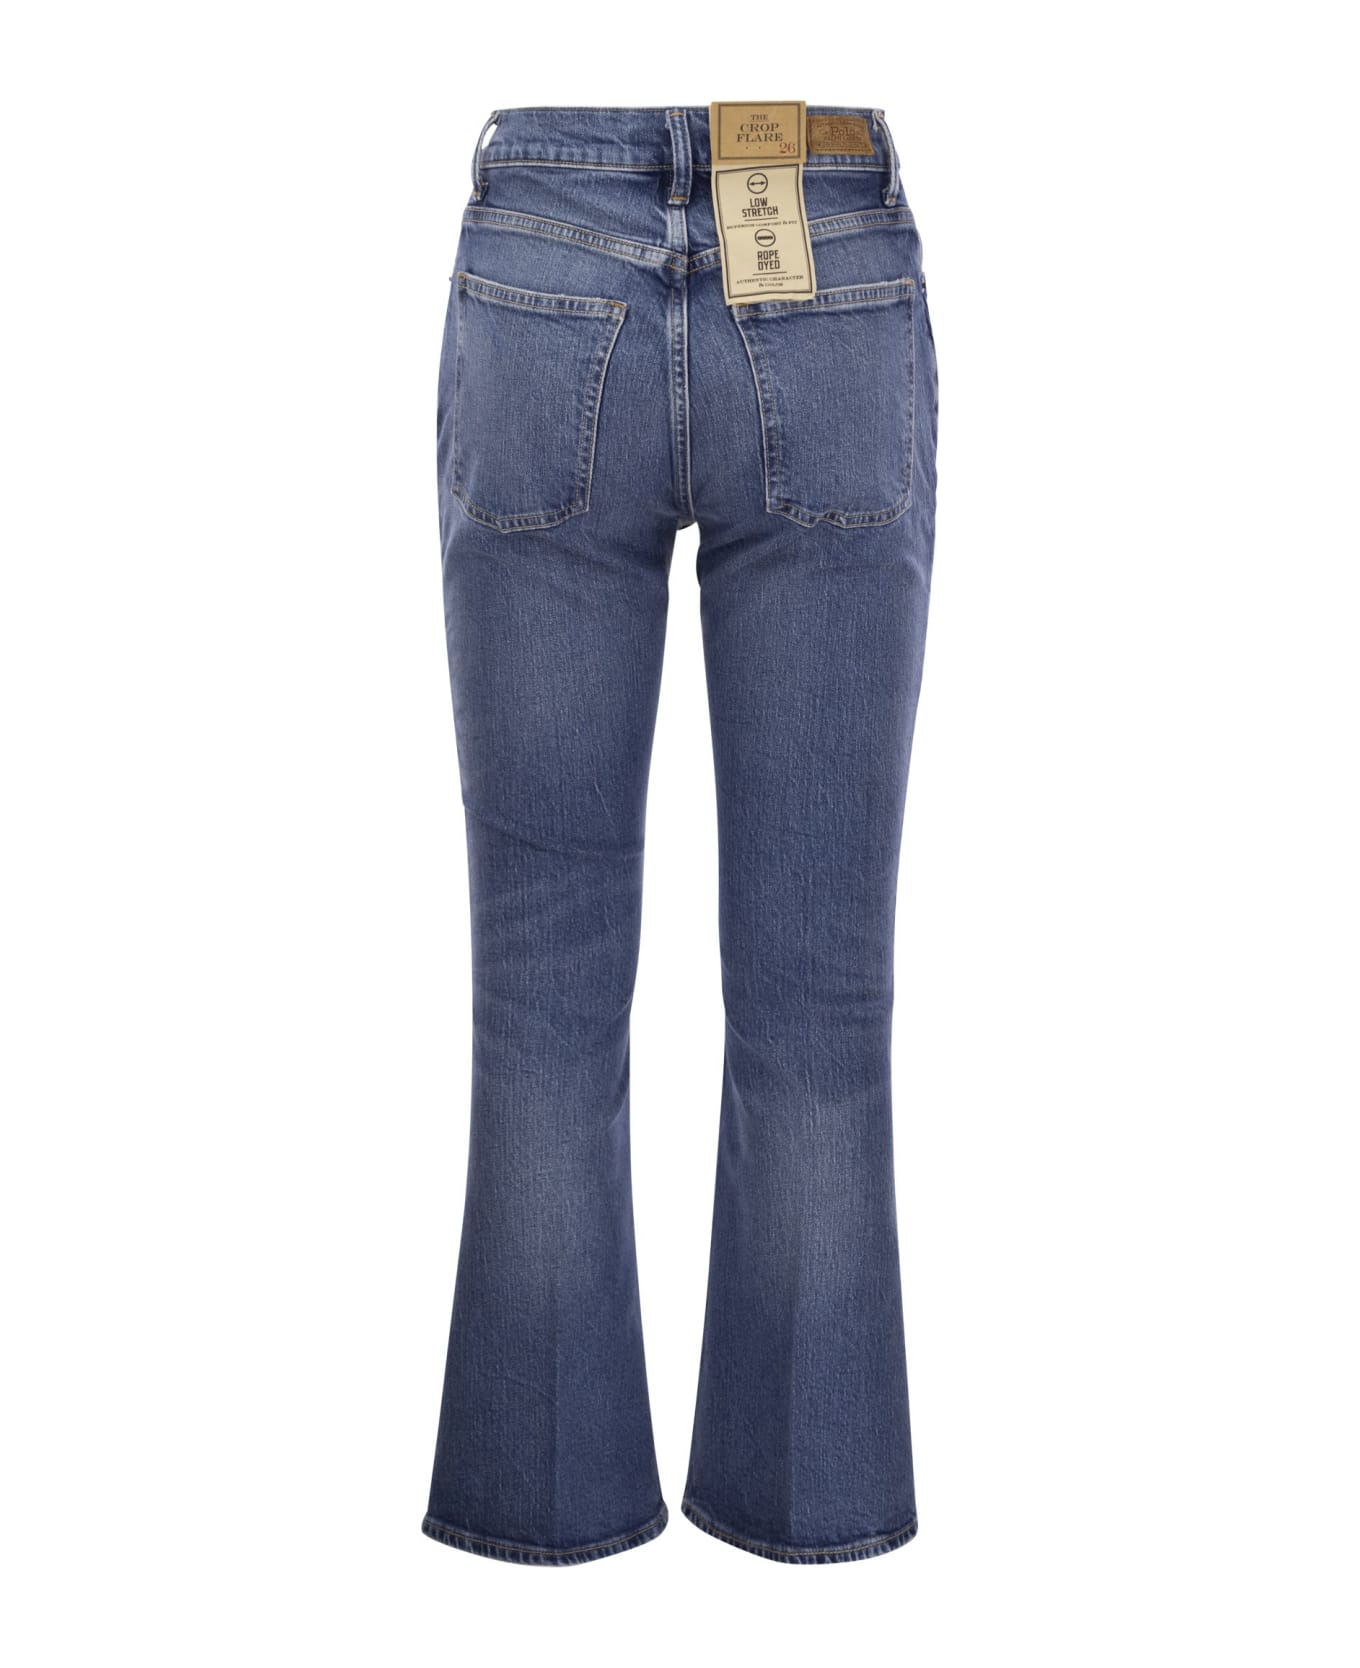 Ralph Lauren Short And Flared Jeans - Persei Wash